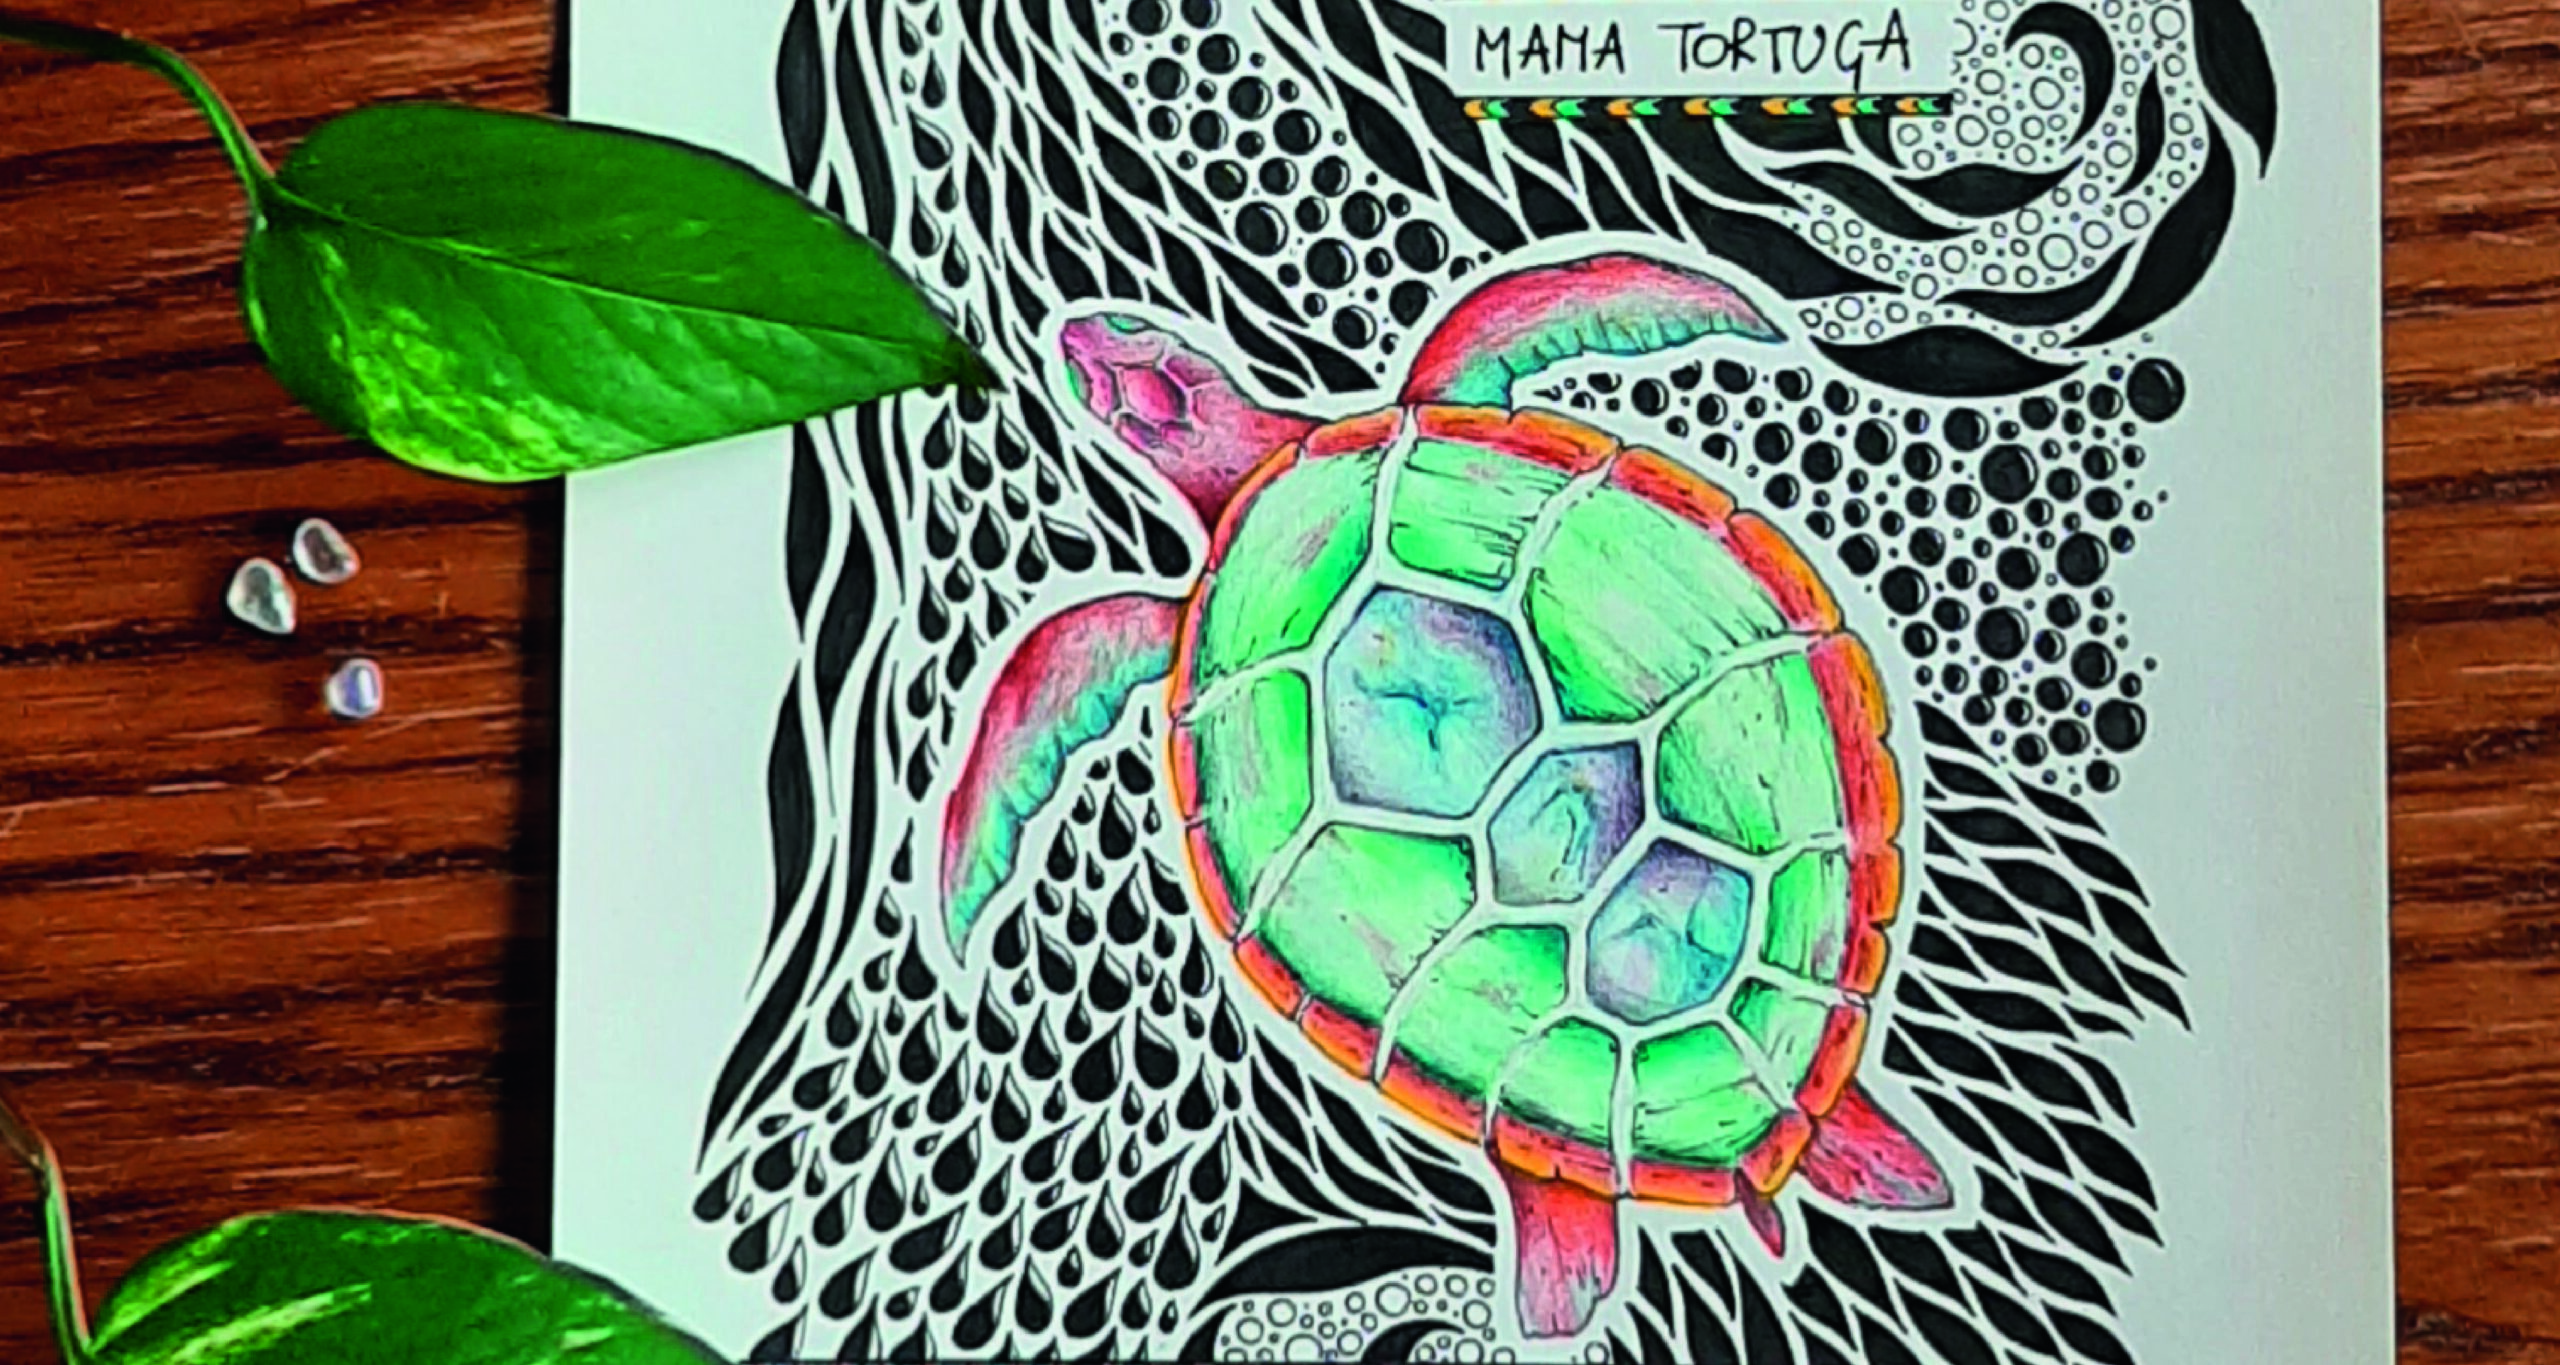 Drawing made by Art Sound Medicine Woman of Mother Turtle. The drawing has black line drawings in the back and a colorful turtle in the middle. The drawing serves as an invitation to discover the Creative Space inside yourself, on the website and here on the blog.